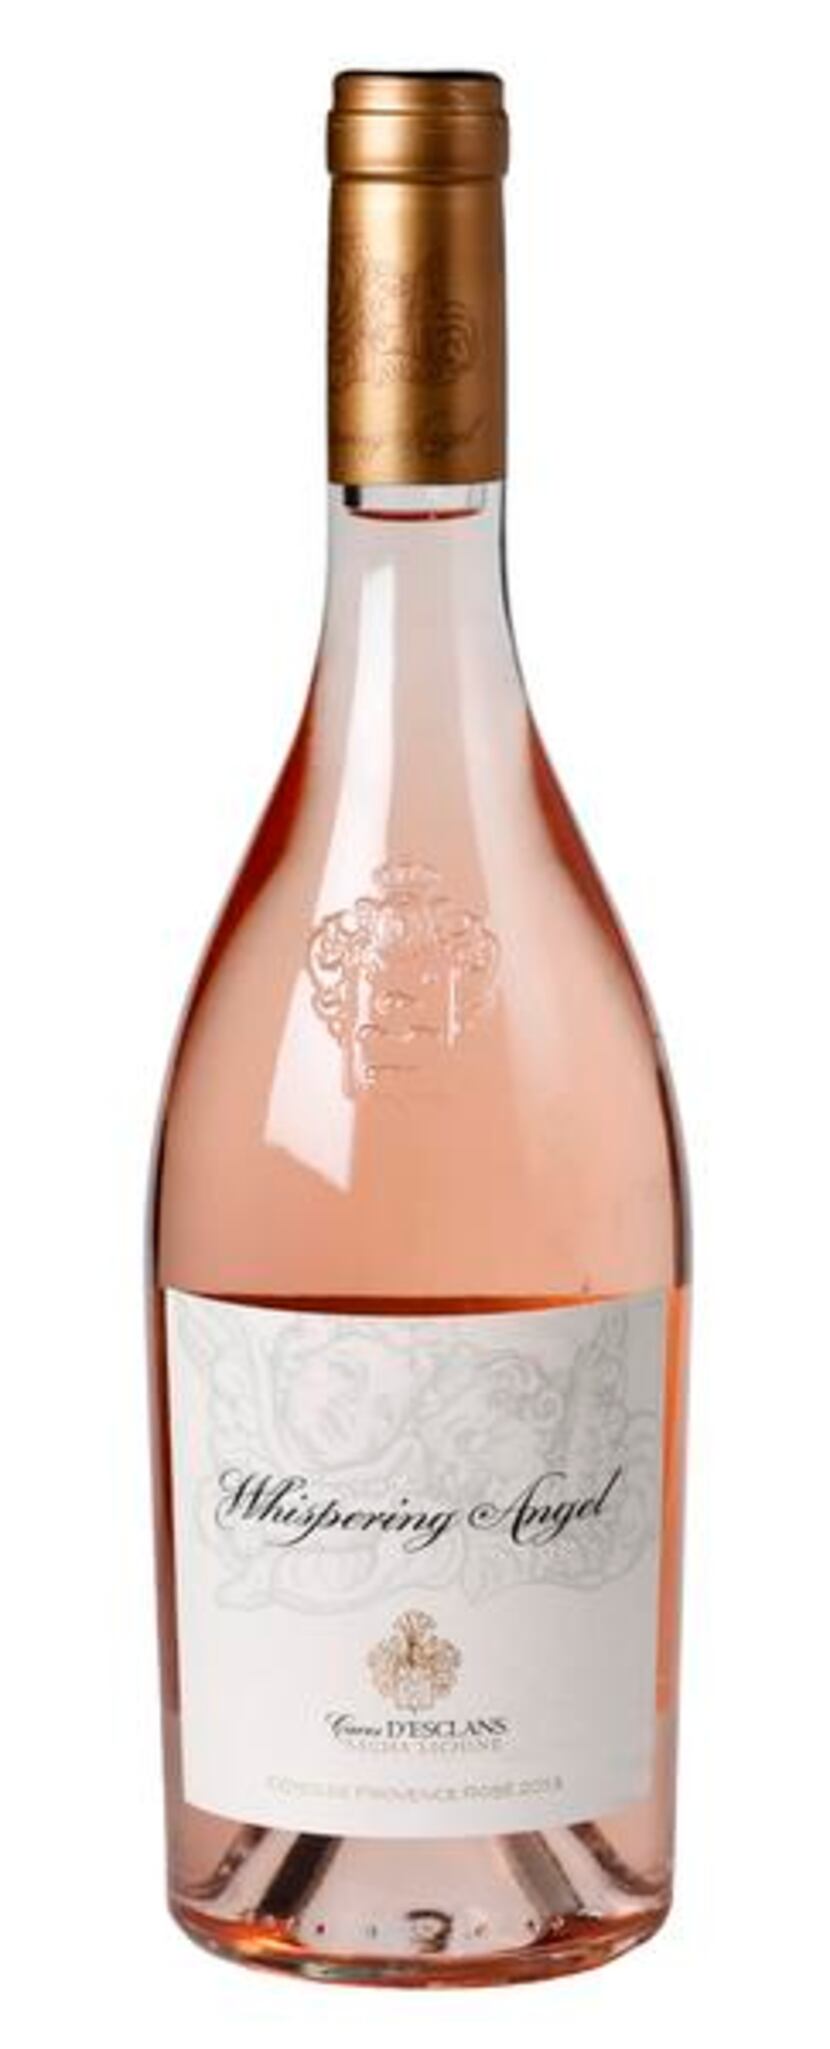 
Whispering Angel Côtes de Provence Rosé, Caves D’Esclans, 2013, France. Made from a blend...